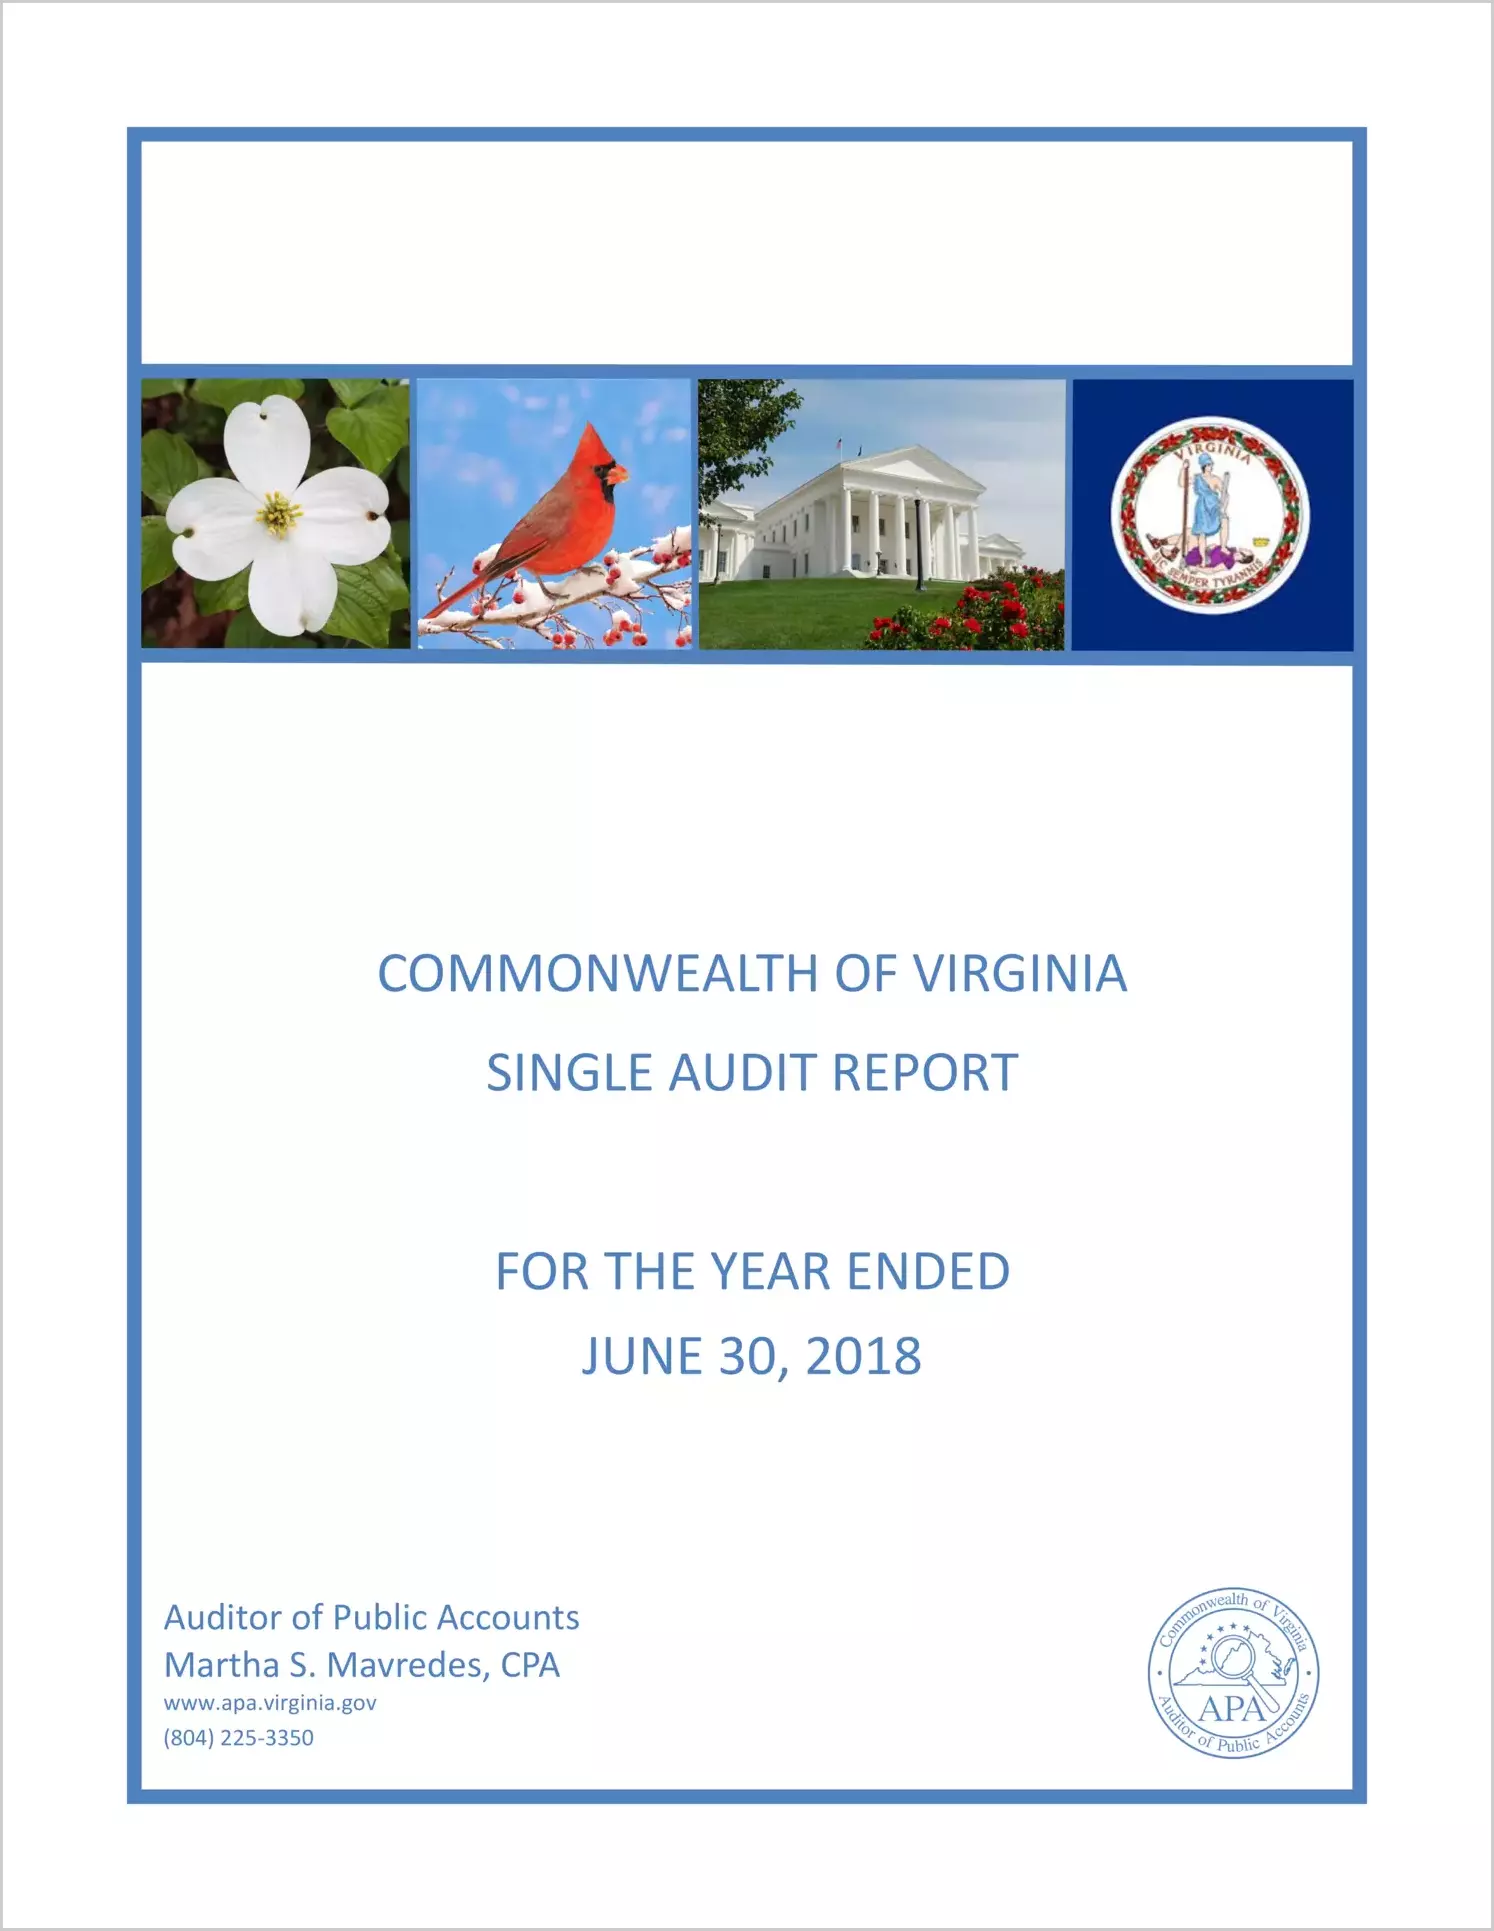 Commonwealth of Virginia Single Audit Report for the Year Ended June 30, 2018